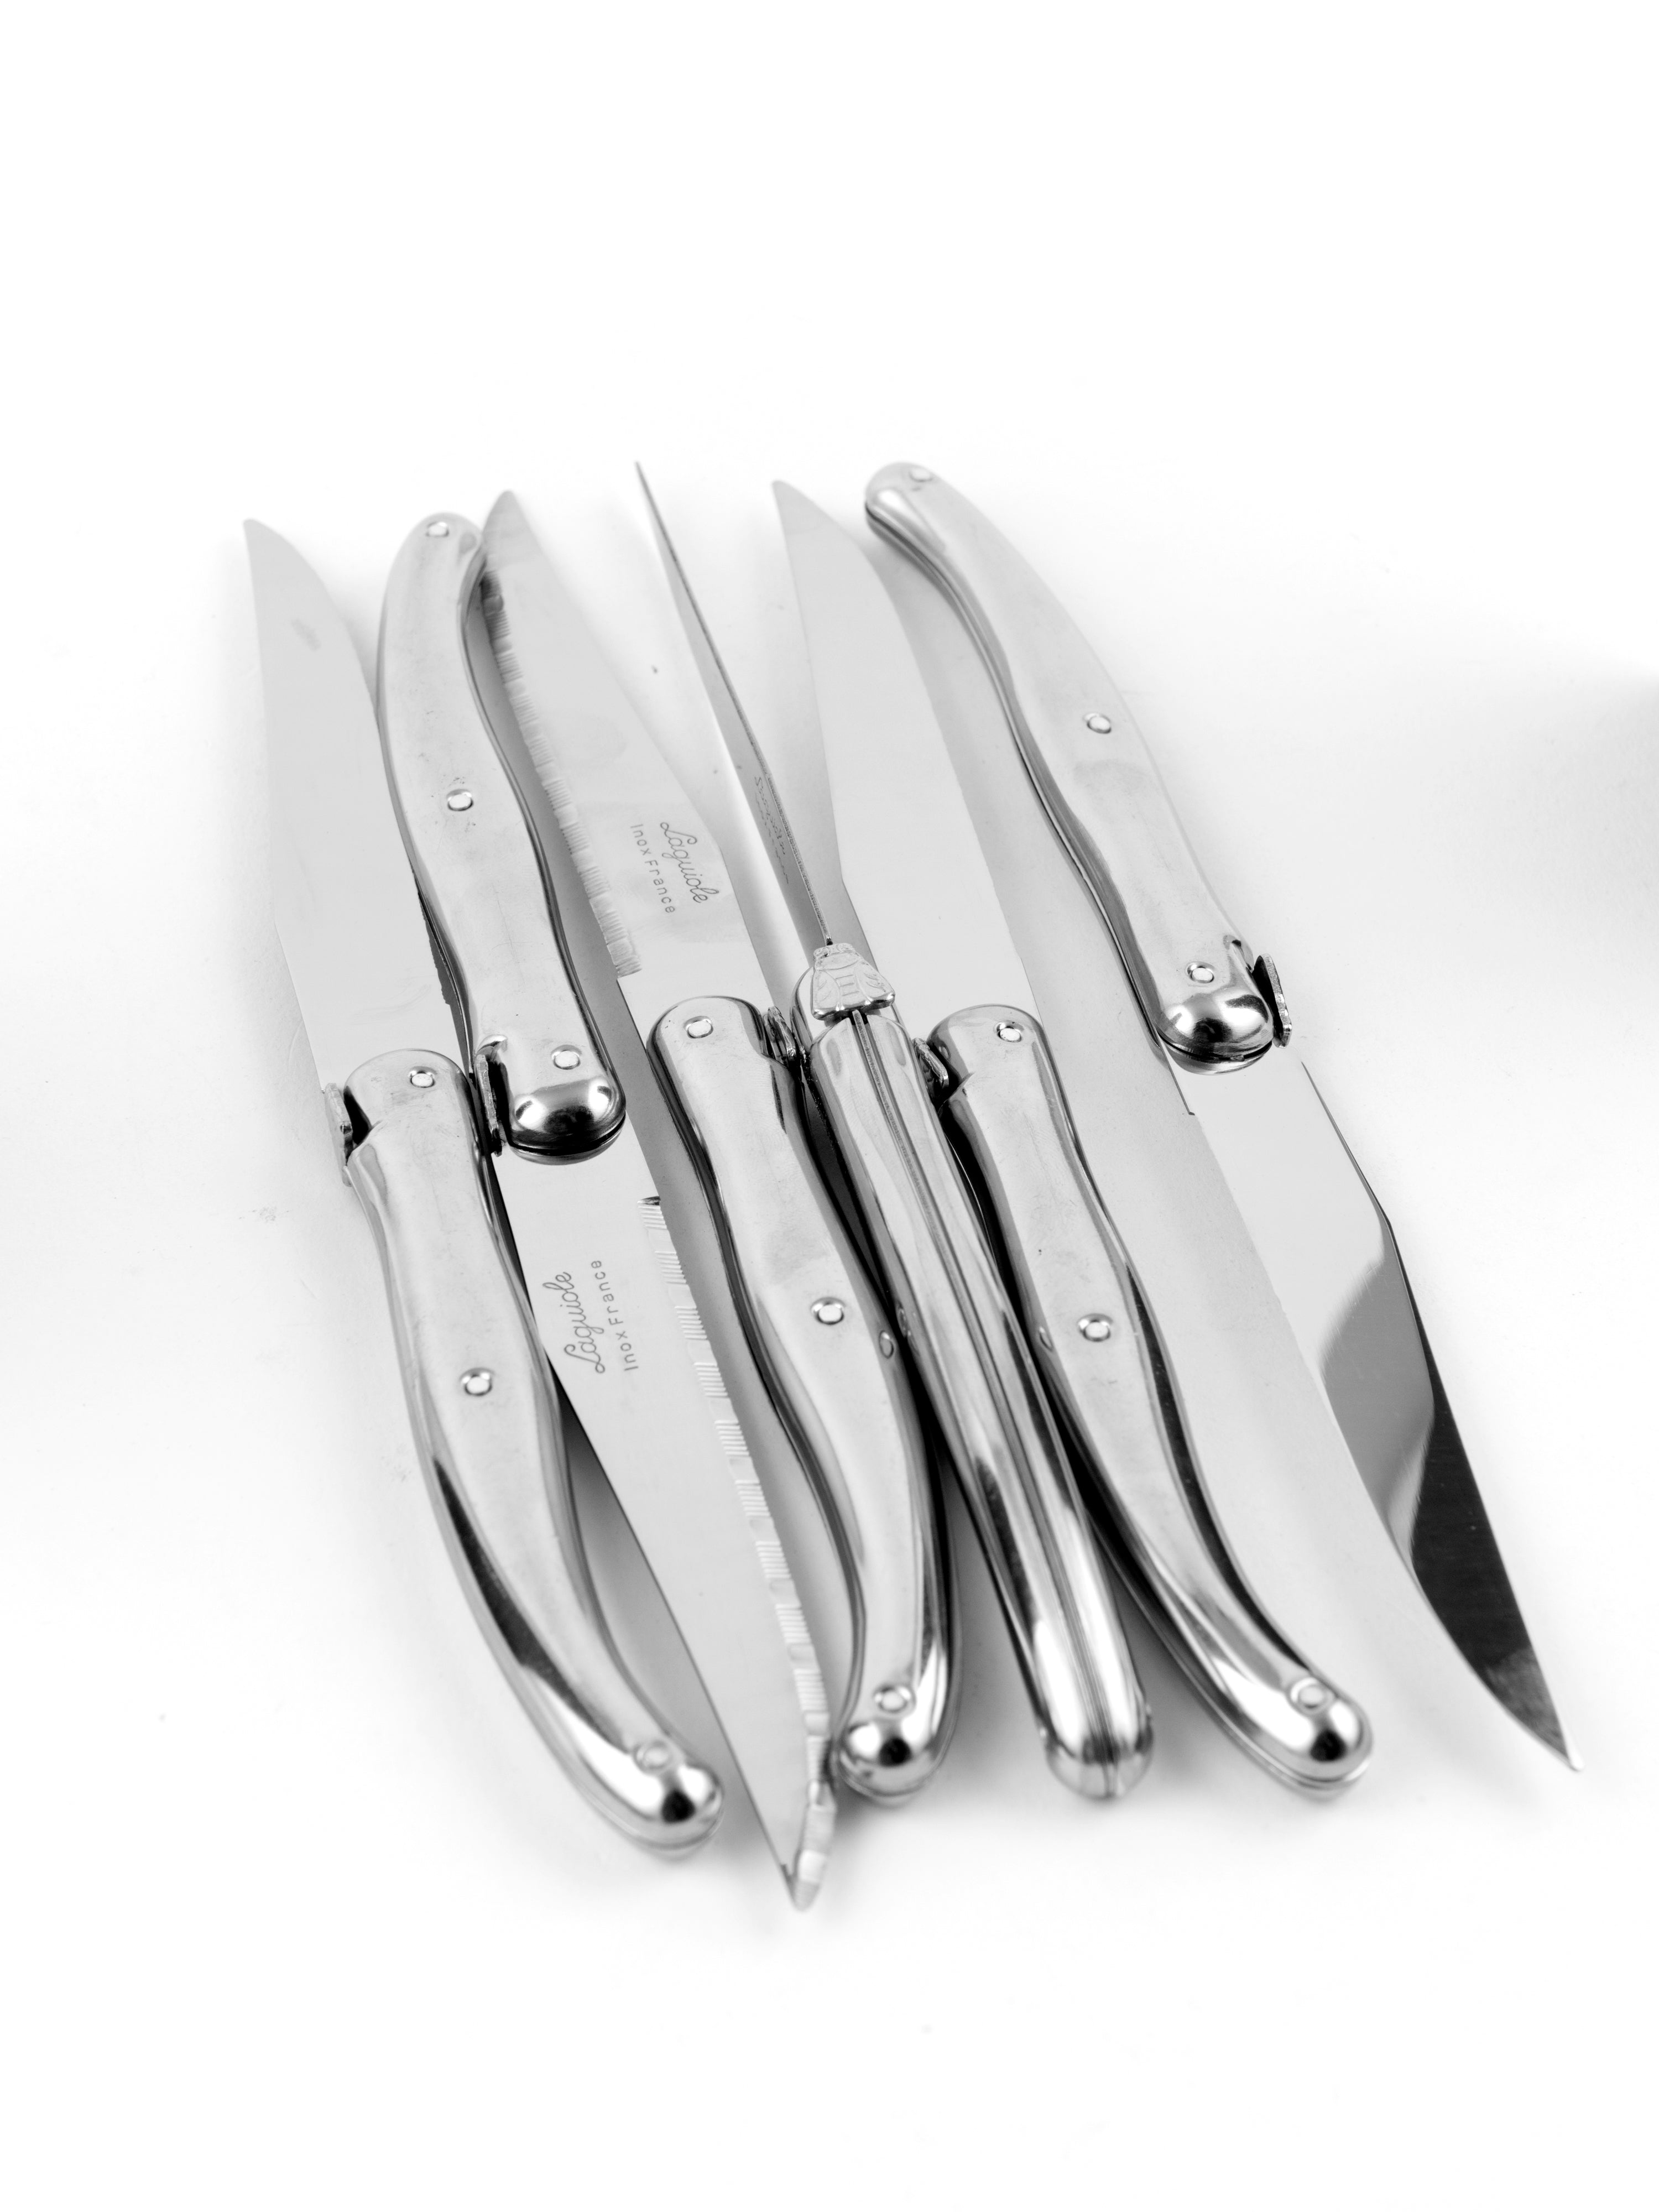 Laguiole Stainless Steel Platine Knives in Wooden Box with Acrylic Lid (Set of 6) Cutlery Laguiole Brand_Laguiole Flatware Sets Kitchen_Dinnerware Kitchen_Kitchenware Laguiole DSC3704_JasonLeCras_LG_6bbe00f7-5d79-4ad3-851a-c7c9eaf88d23